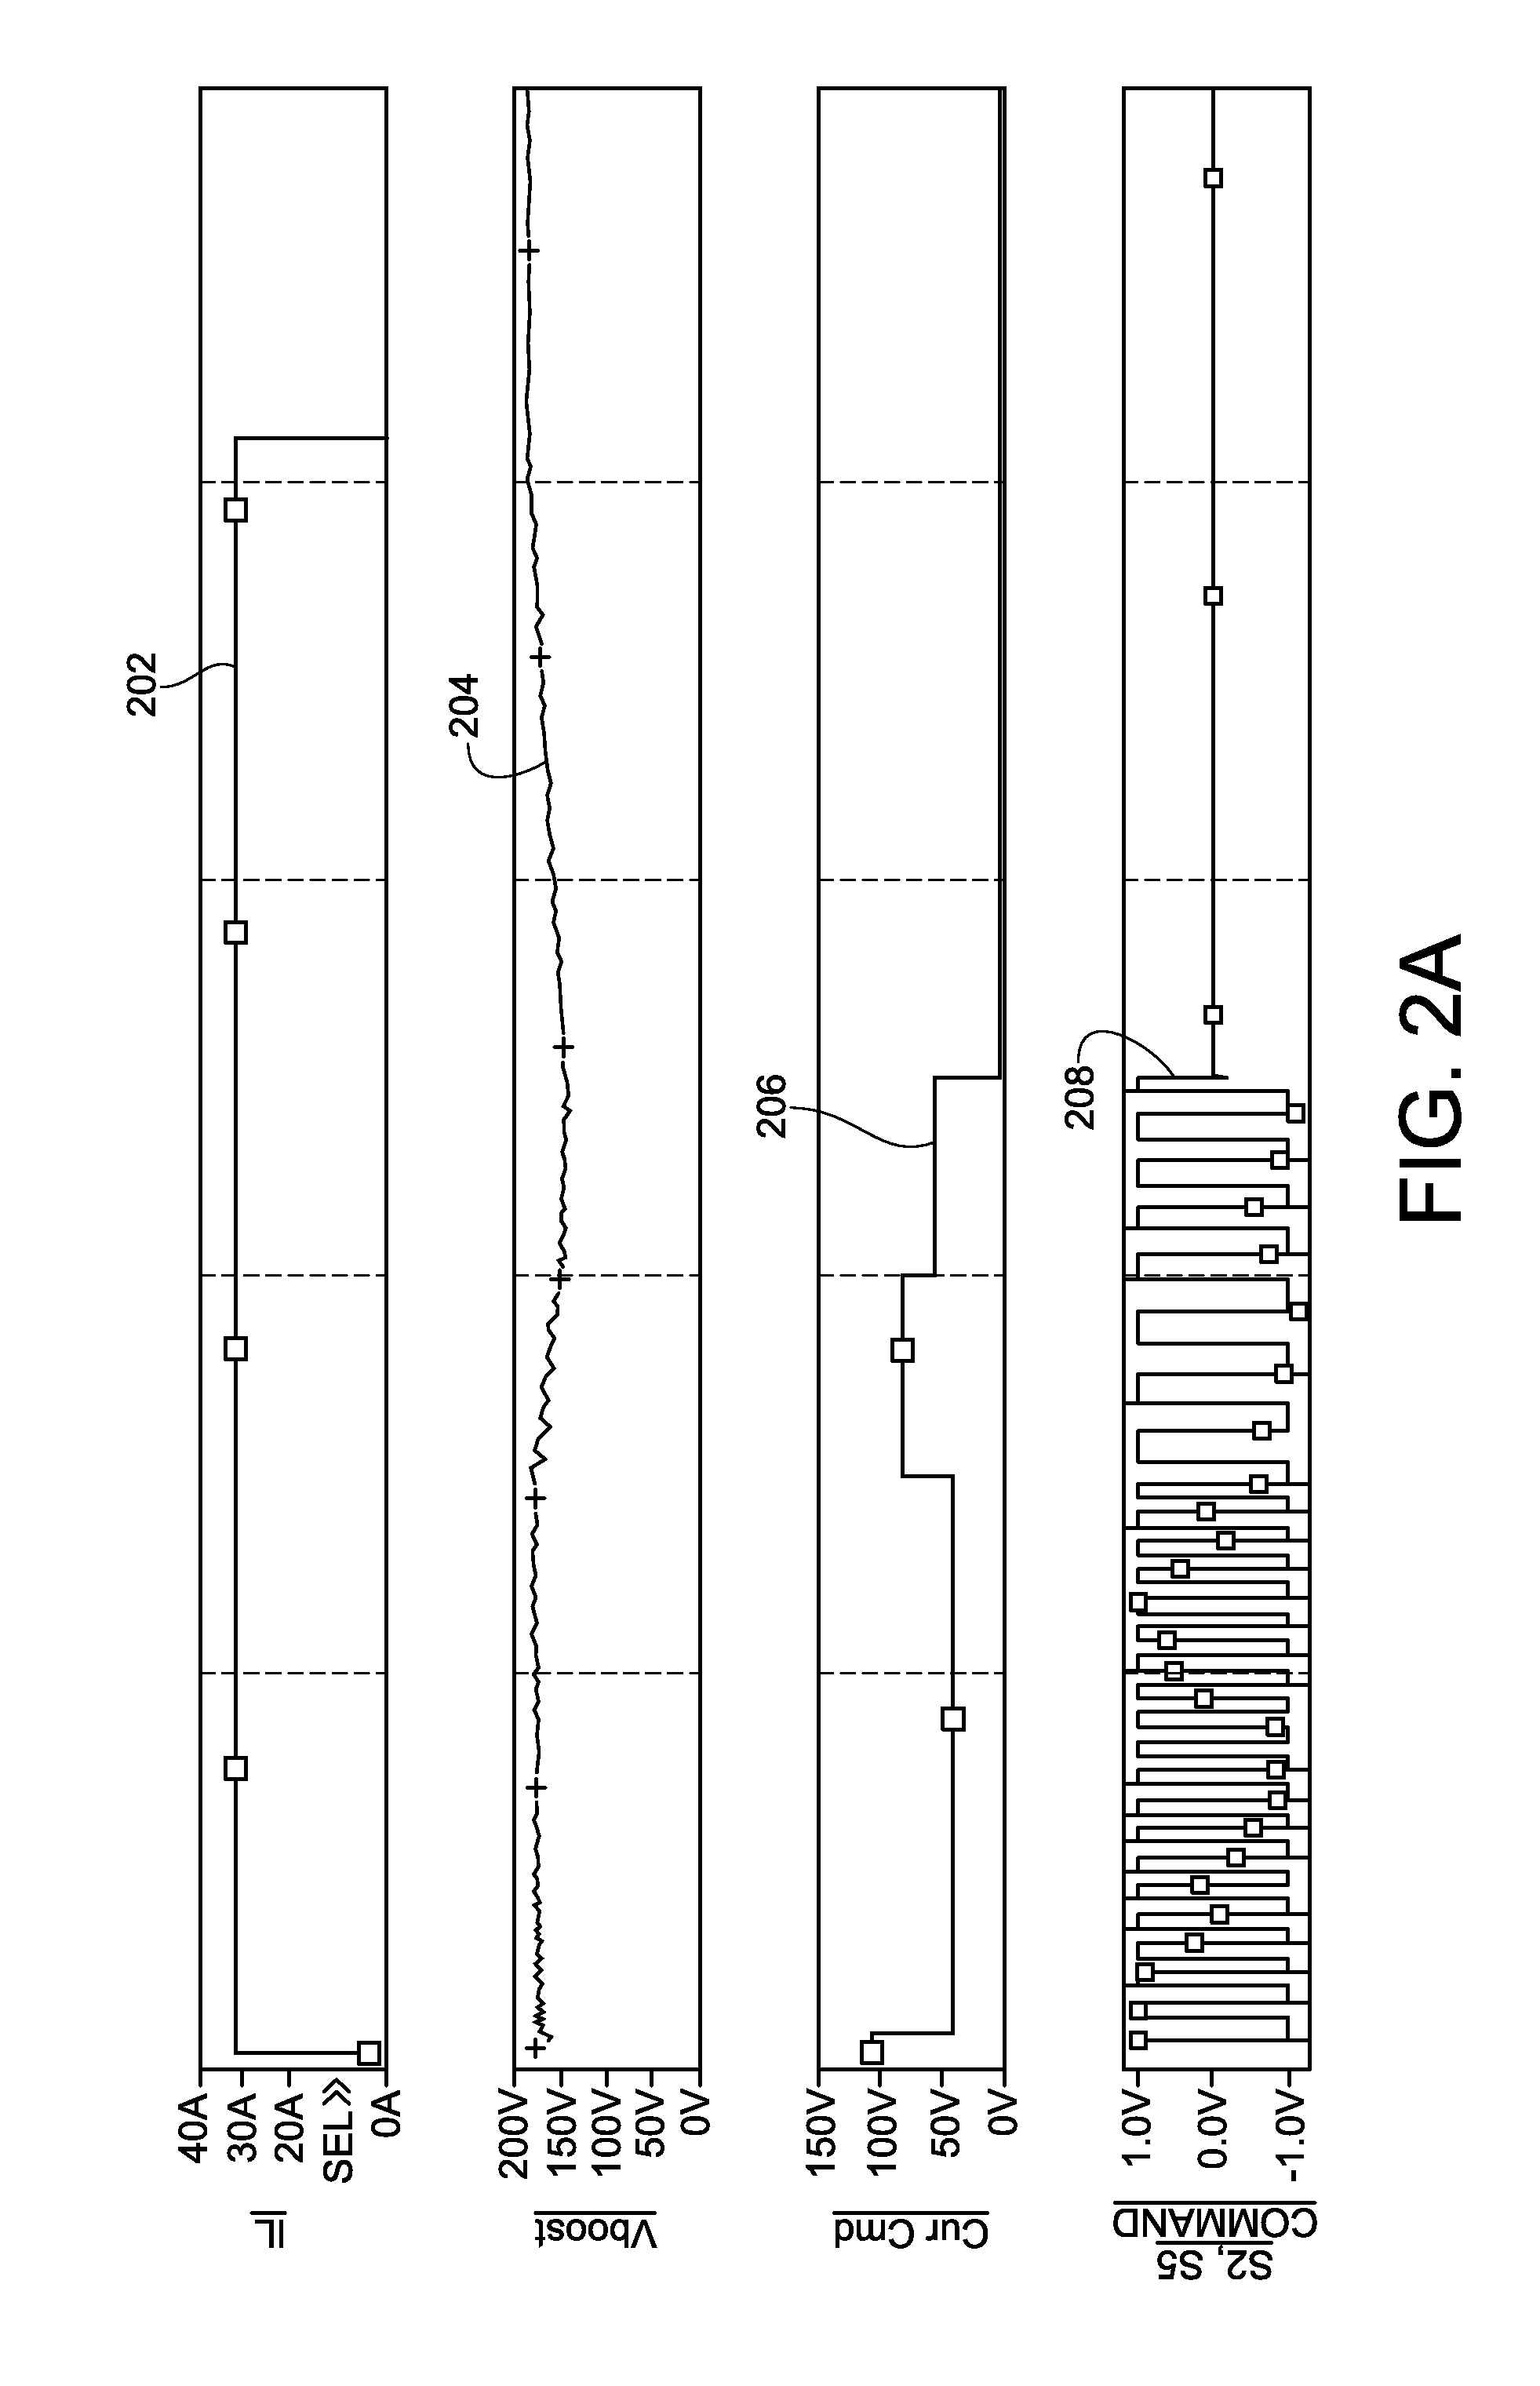 Multiplexing drive circuit for an ac ignition system with current mode control and fault tolerance detection